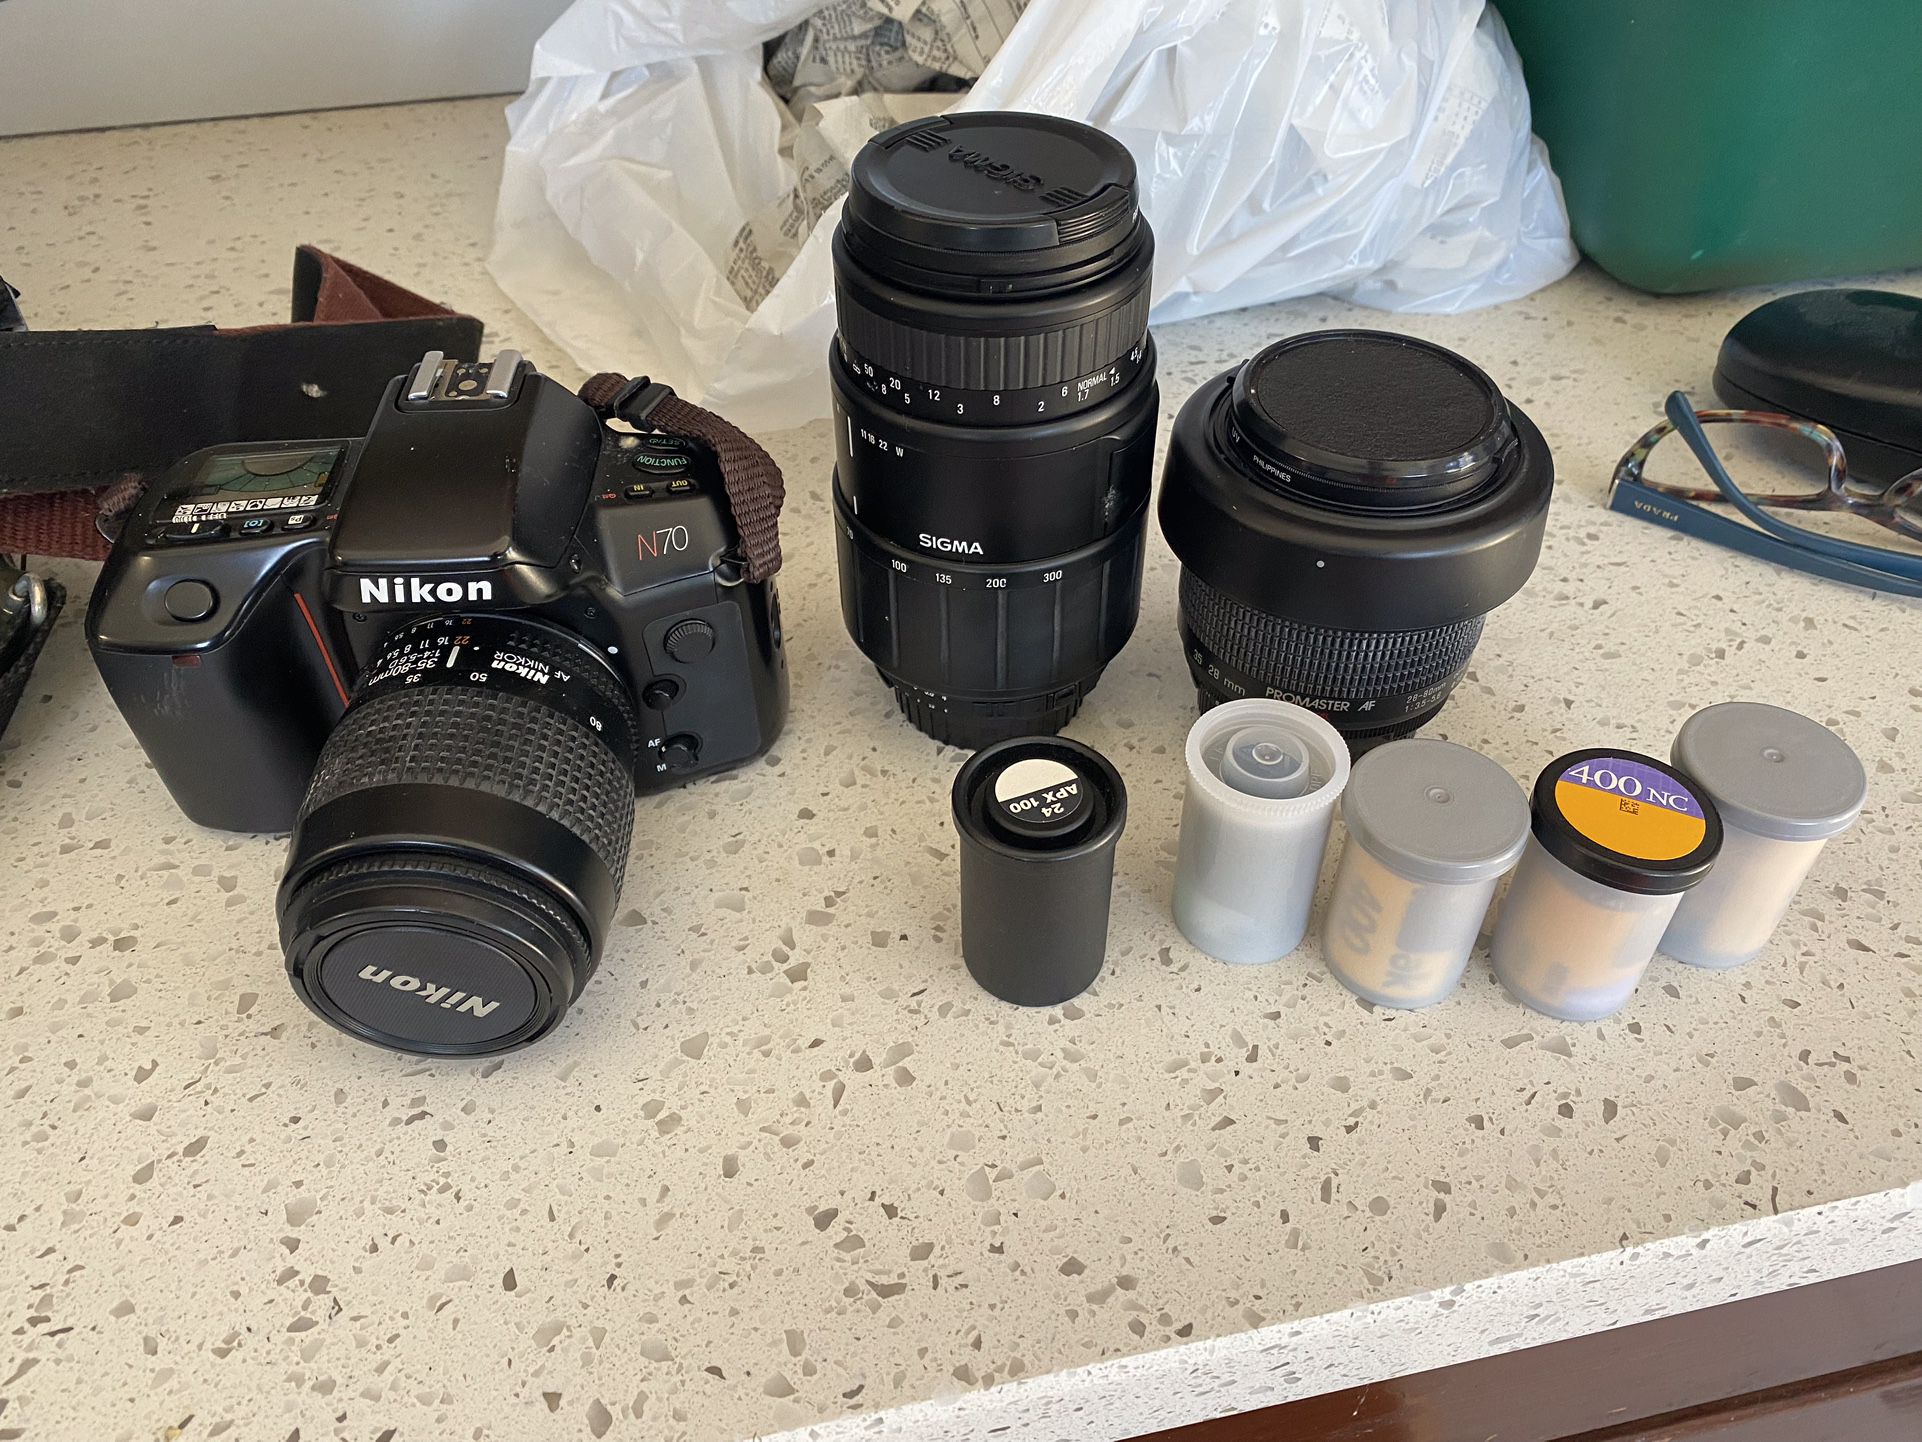 Nikon N70 Film Camera - Three!!! Lens Included - $85 For All 